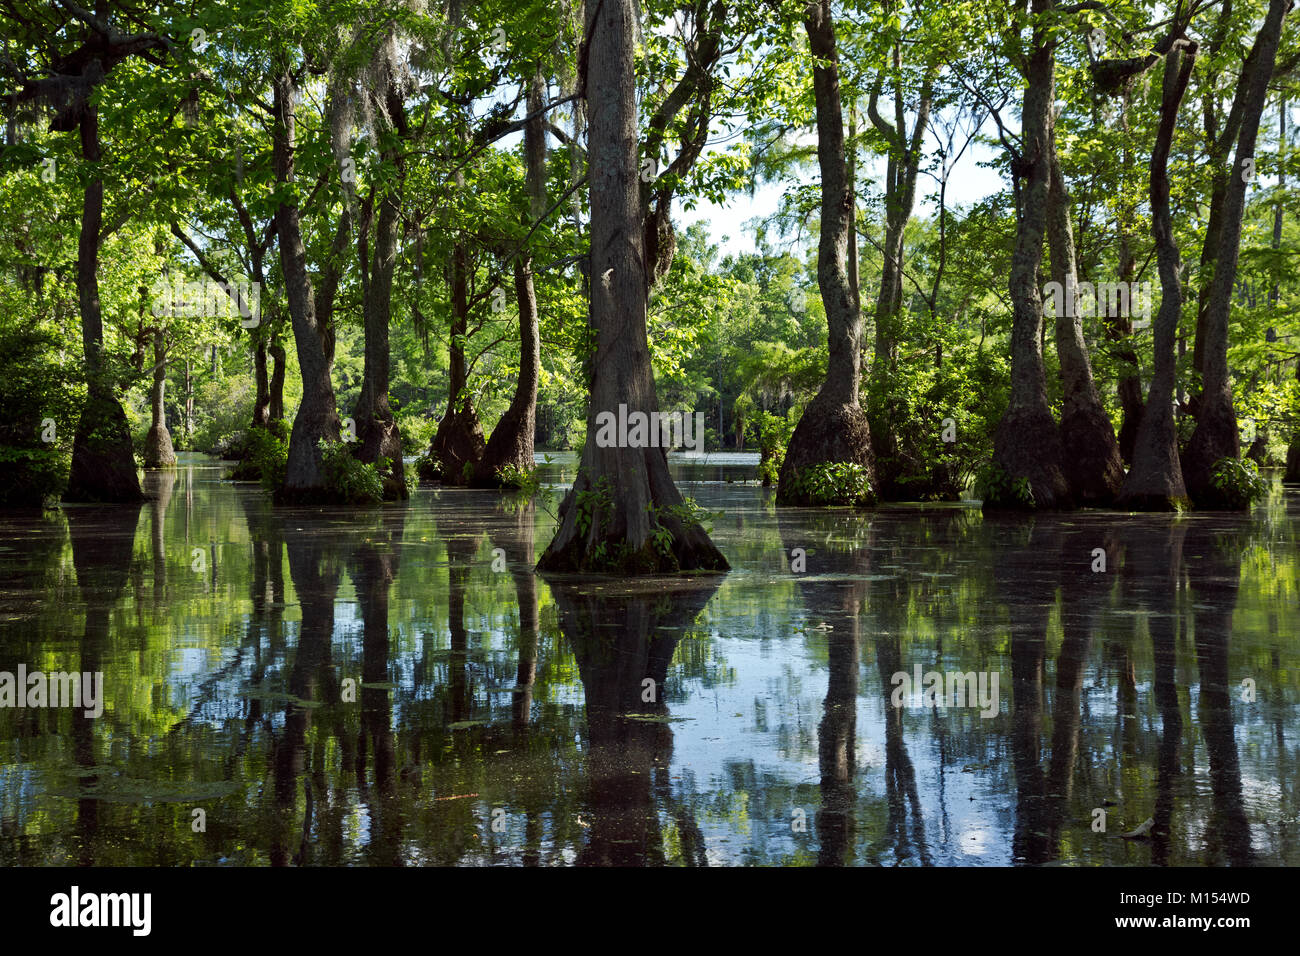 NC01468-00...NORTH CAROLINA - Bald cypress and tupalo gum trees growing in Merchant Millpond; at Merchant Millpond State Park. Stock Photo